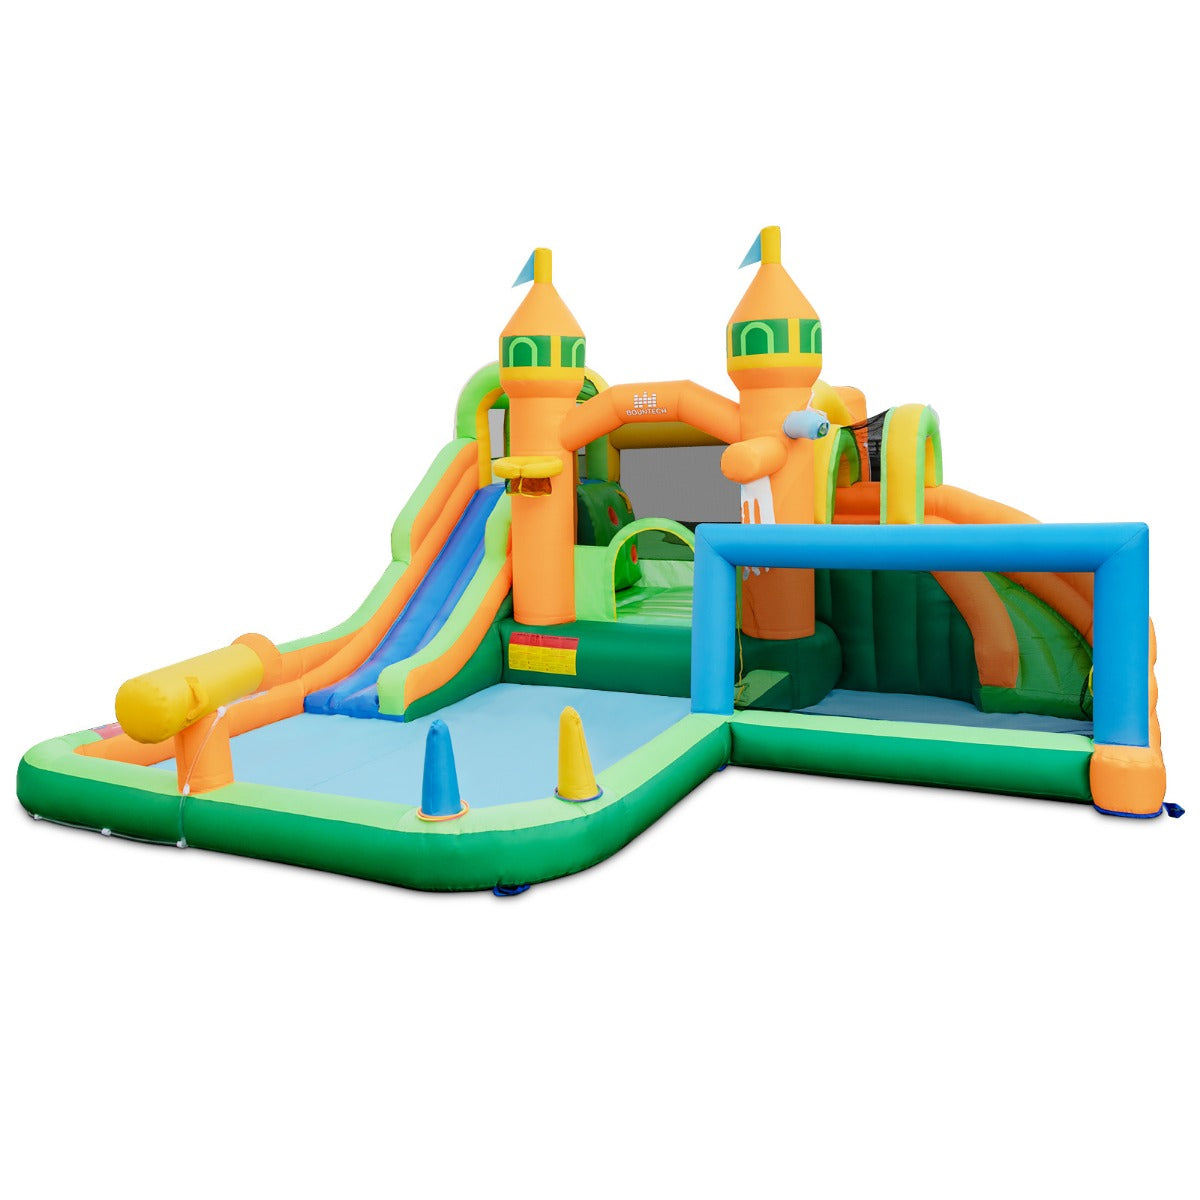 Inflatable Water Park with Slides, Splash Pools, Climbing Wall & Goal